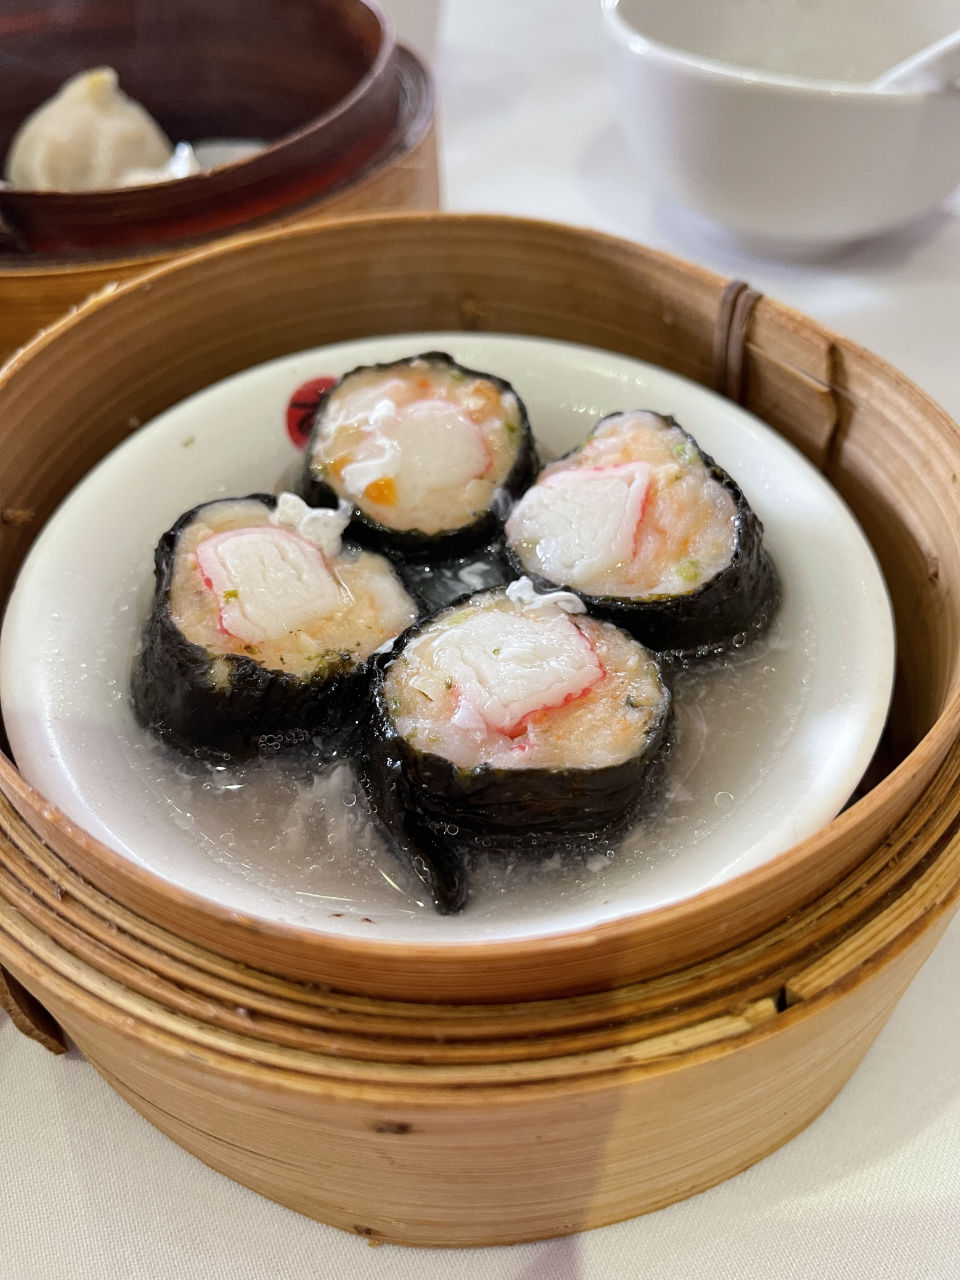 Steamed Seaweed Rolls with Pork and Crab Stick